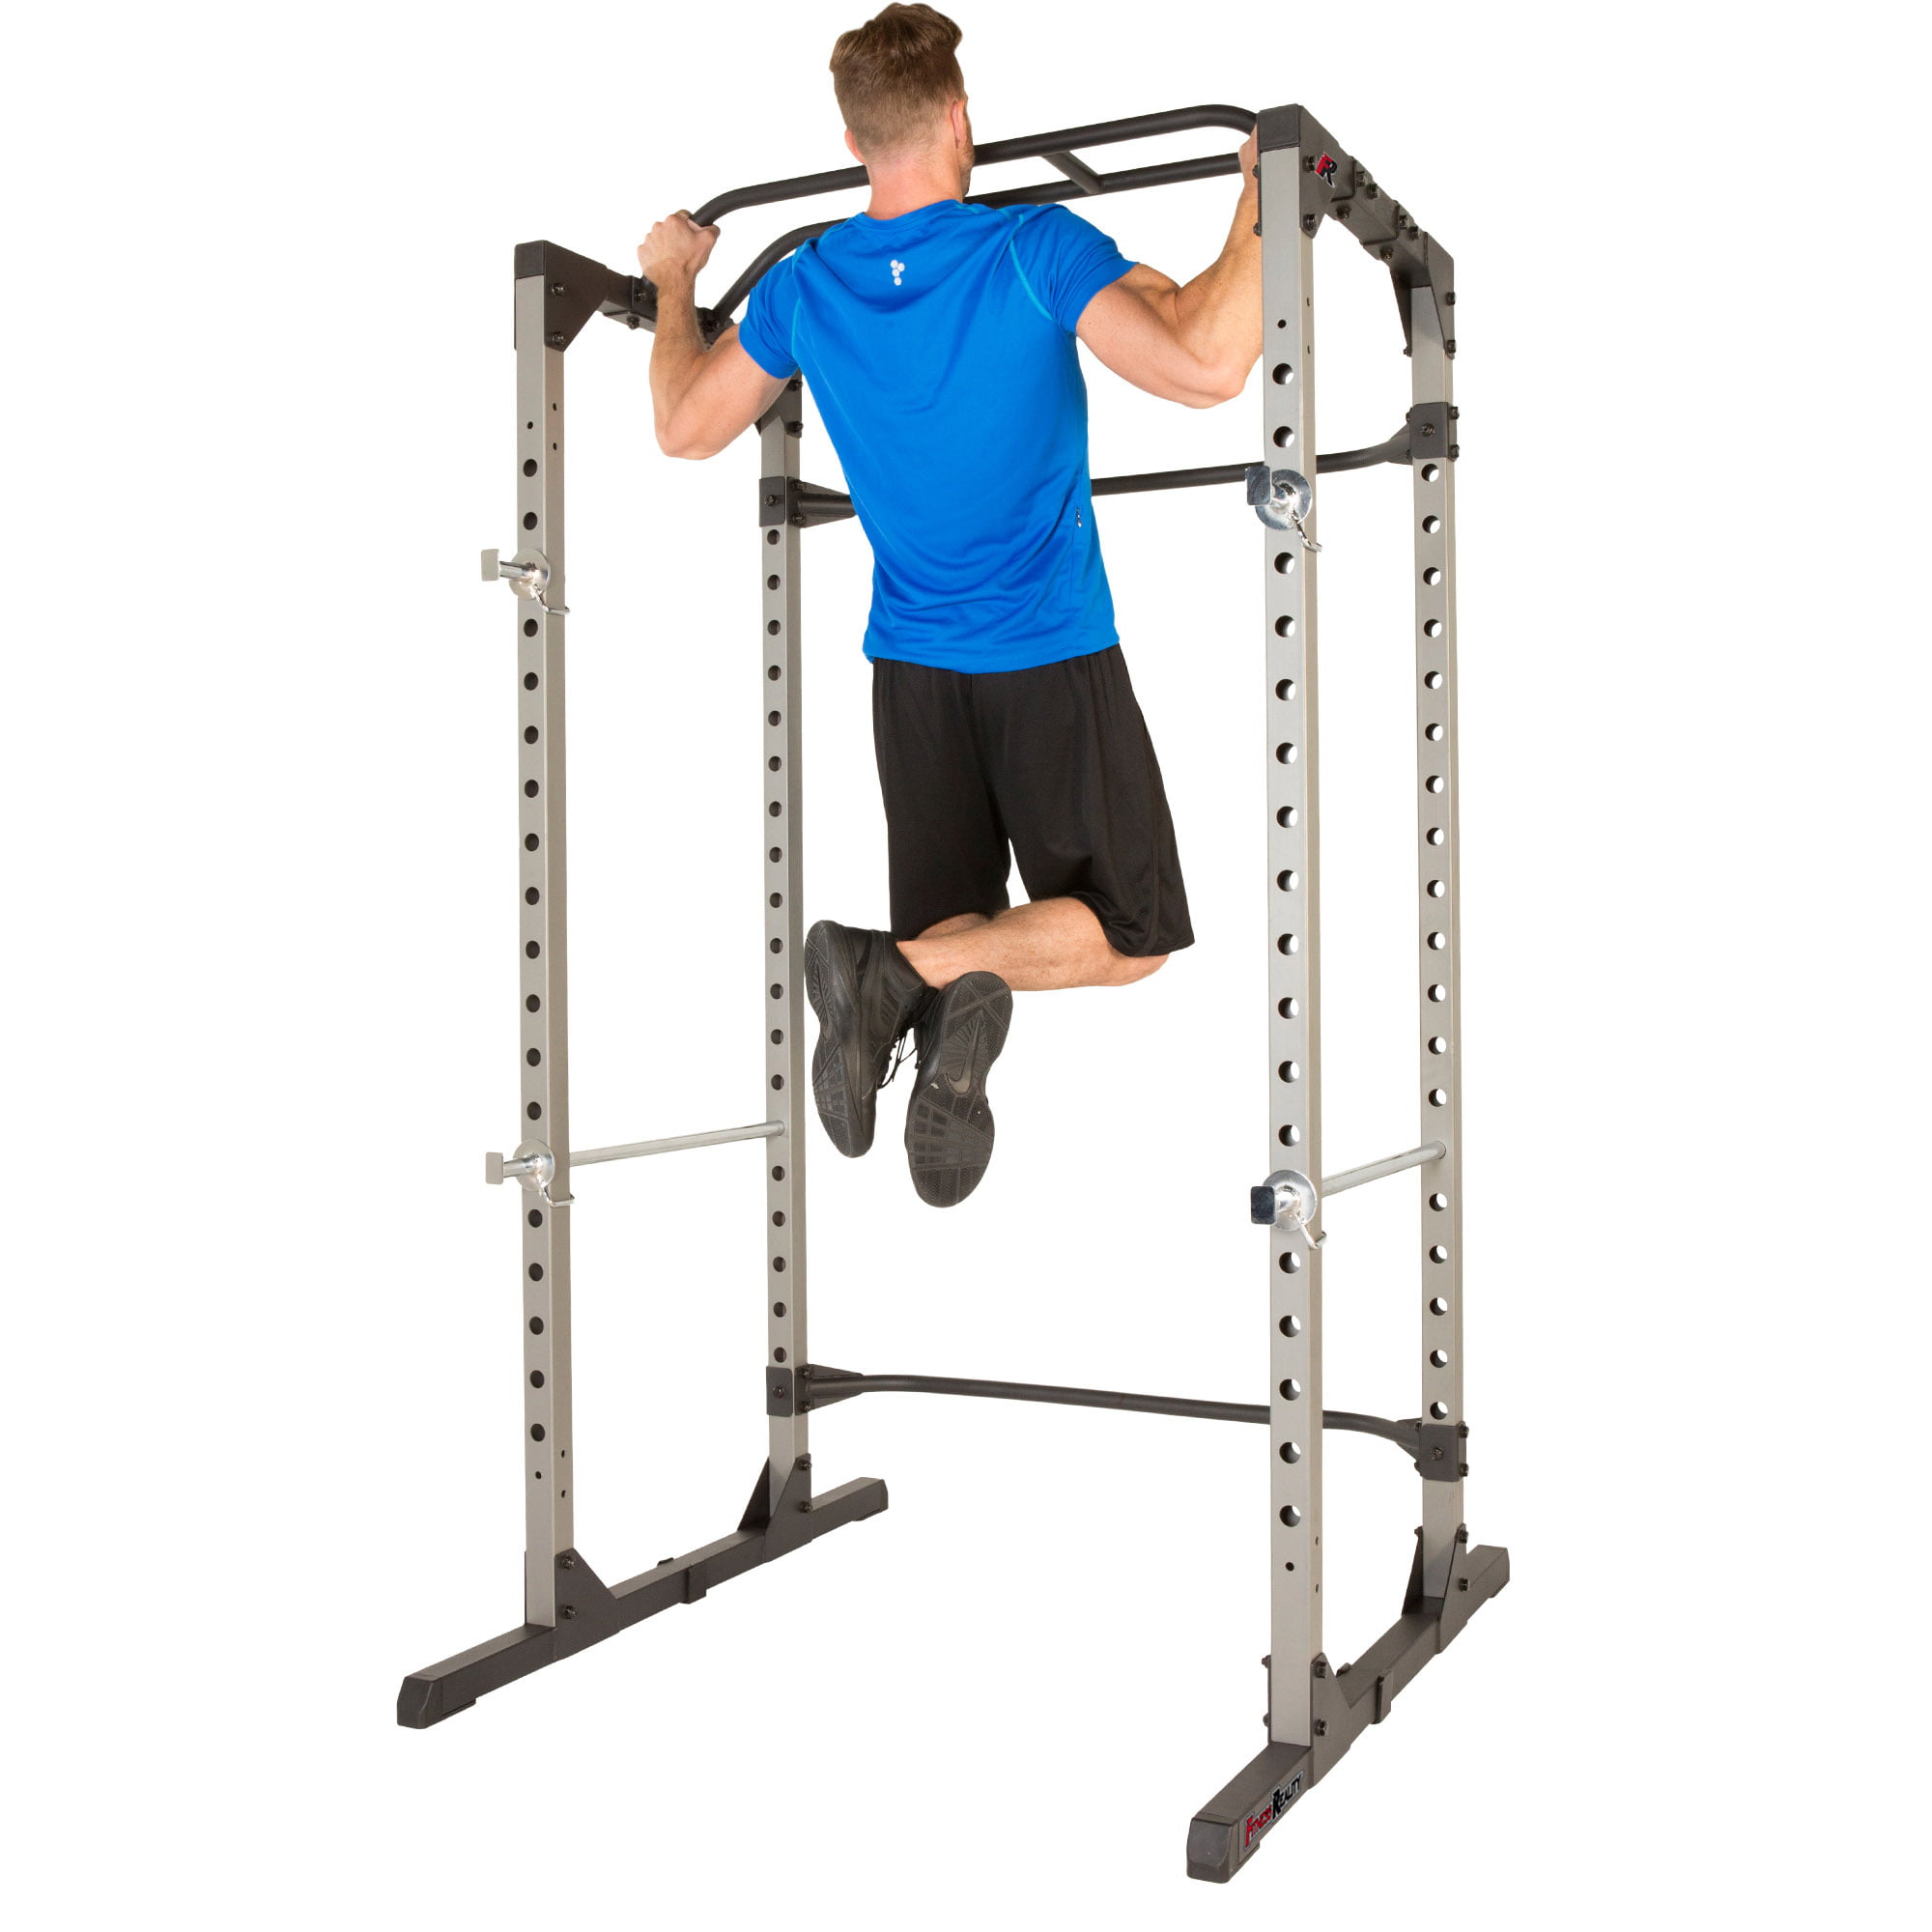 Fitness Reality 810XLT Squat Rack: Pros, Cons, and Alternates